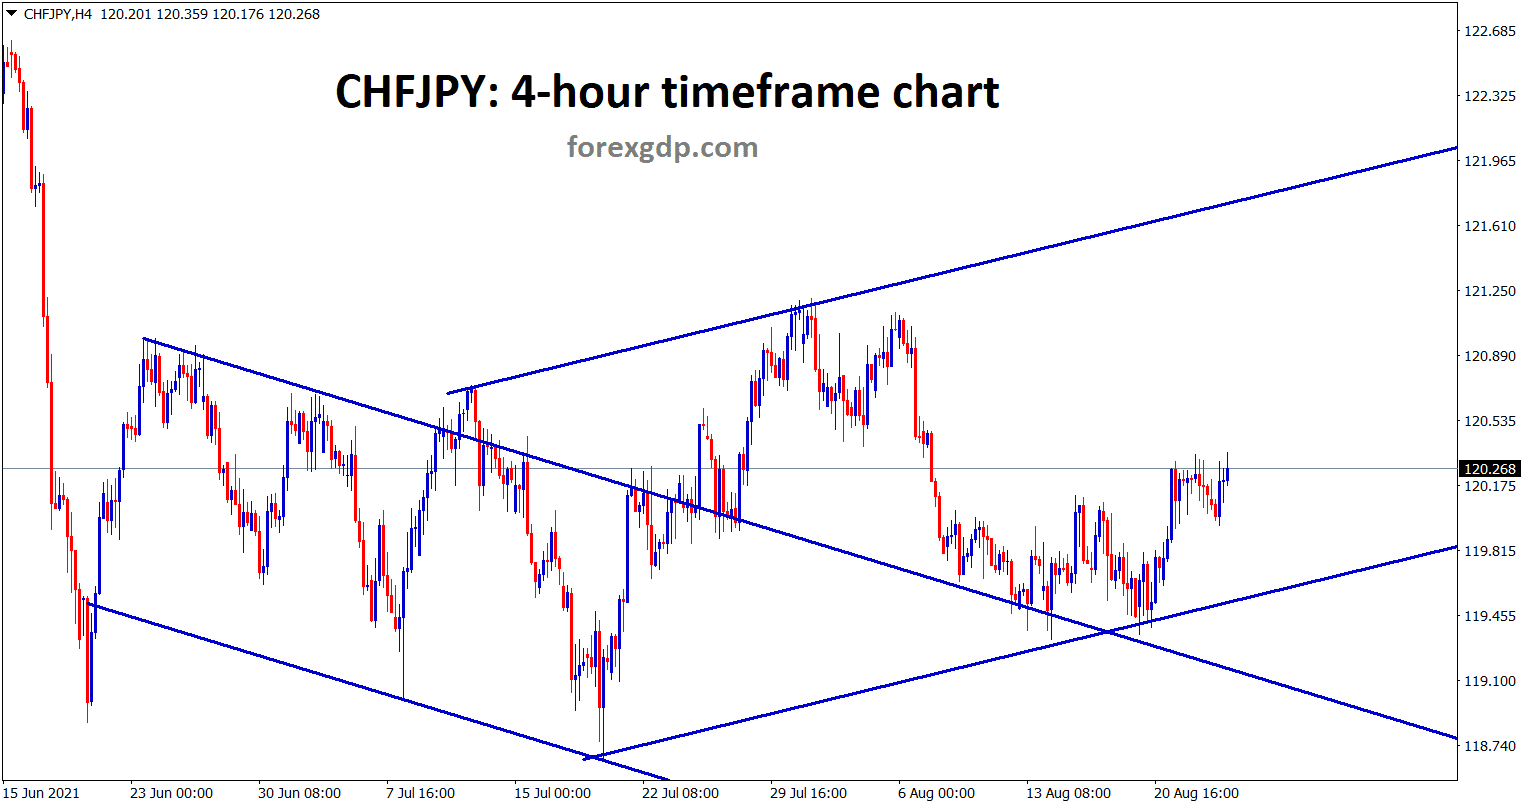 CHFJPY is moving between the ascending channel now after retesting the previous broken ascending channel line